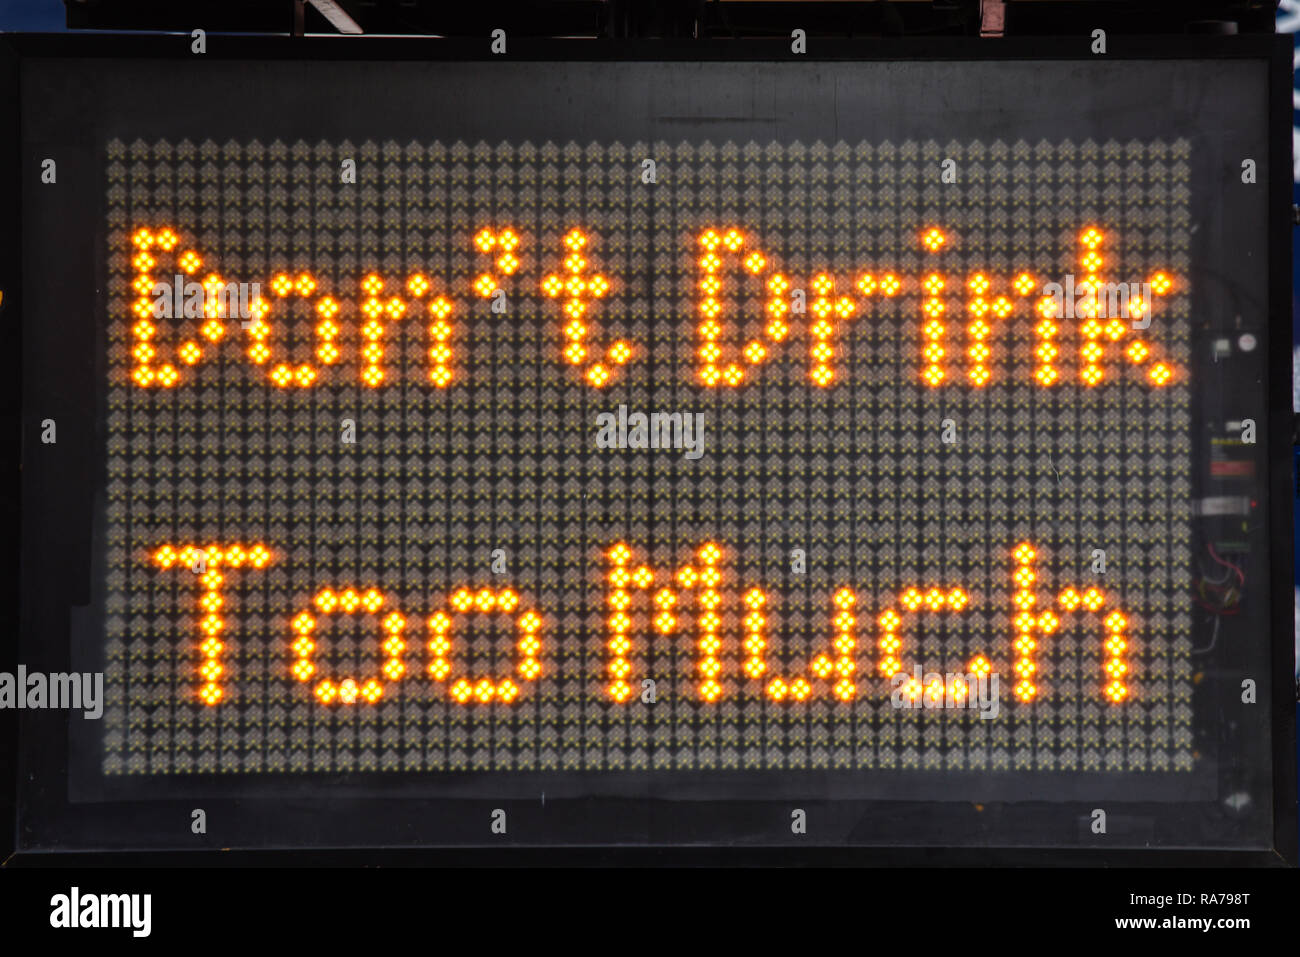 Don't drink too much matrix sign for New Year's Eve revelers in London, UK. Warning message Stock Photo